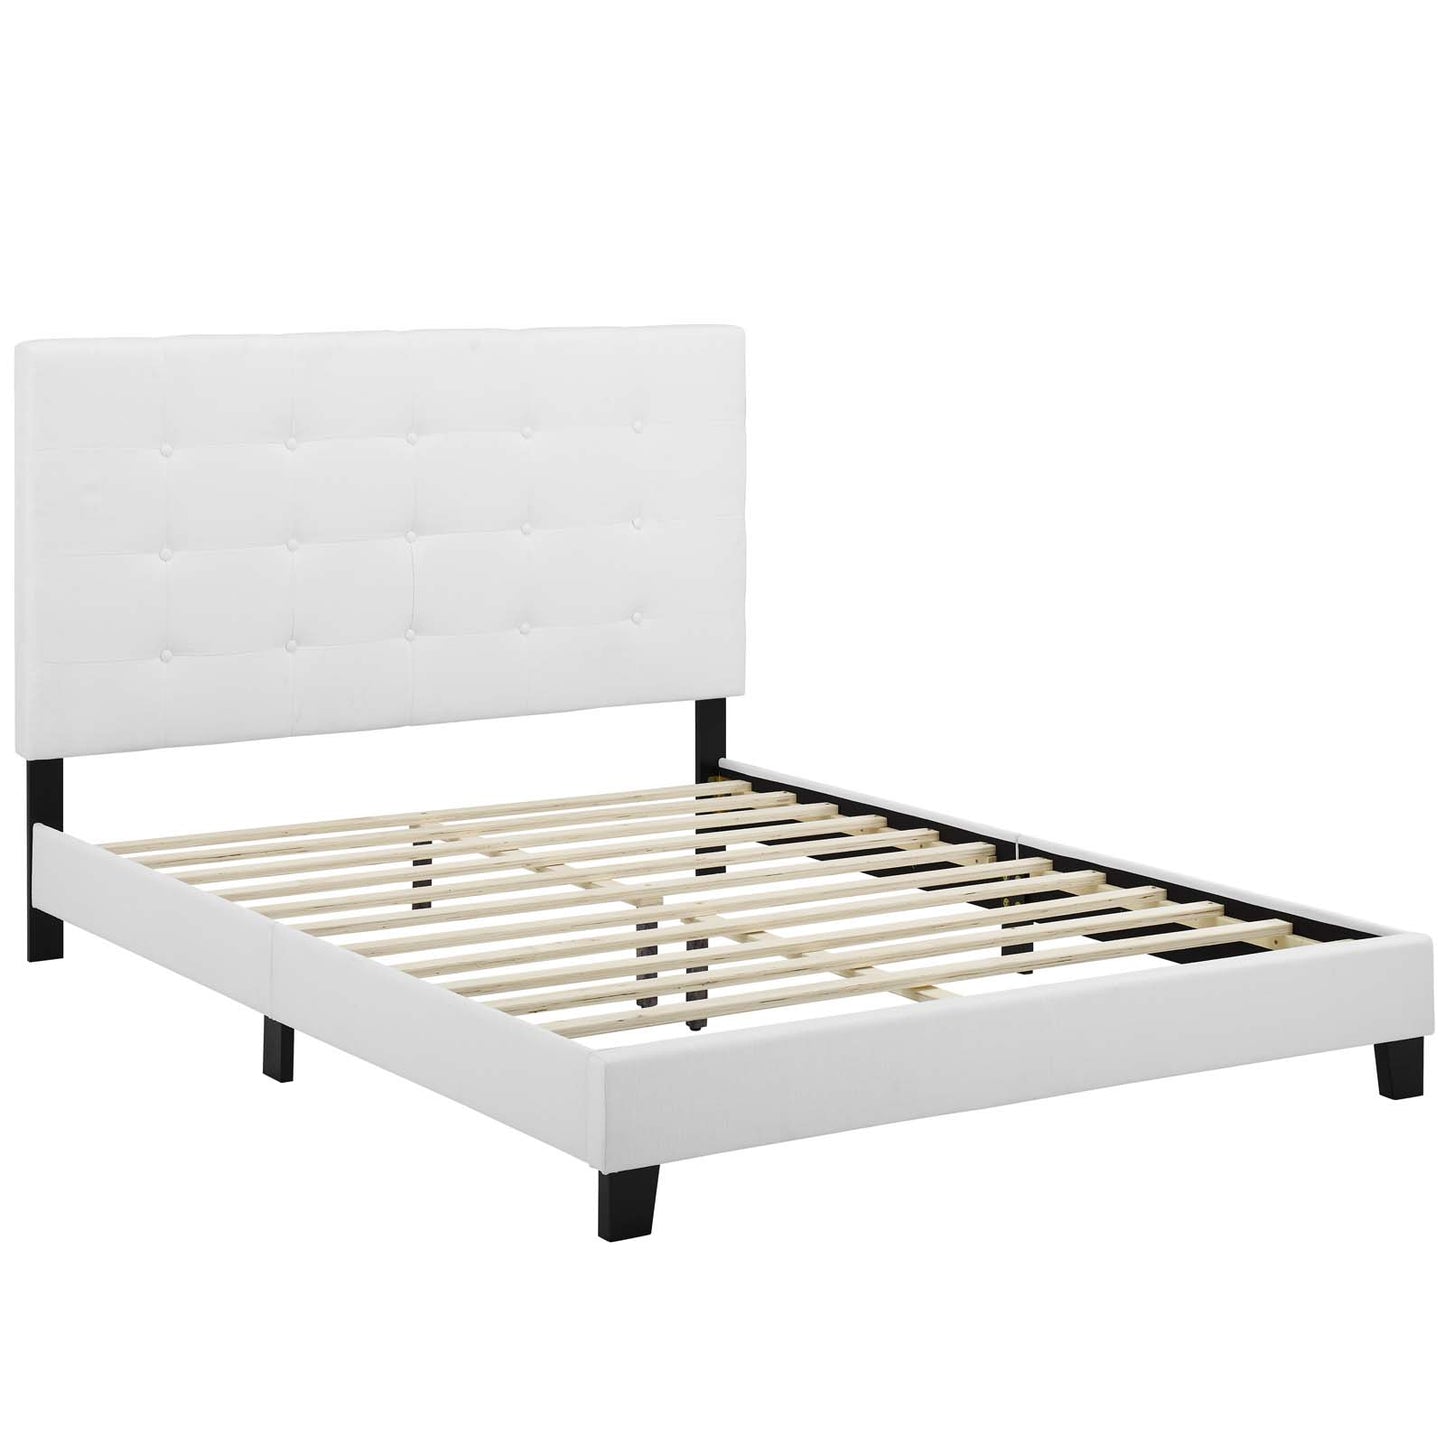 Melanie Queen Tufted Button Upholstered Fabric Platform Bed White MOD-5879-WHI